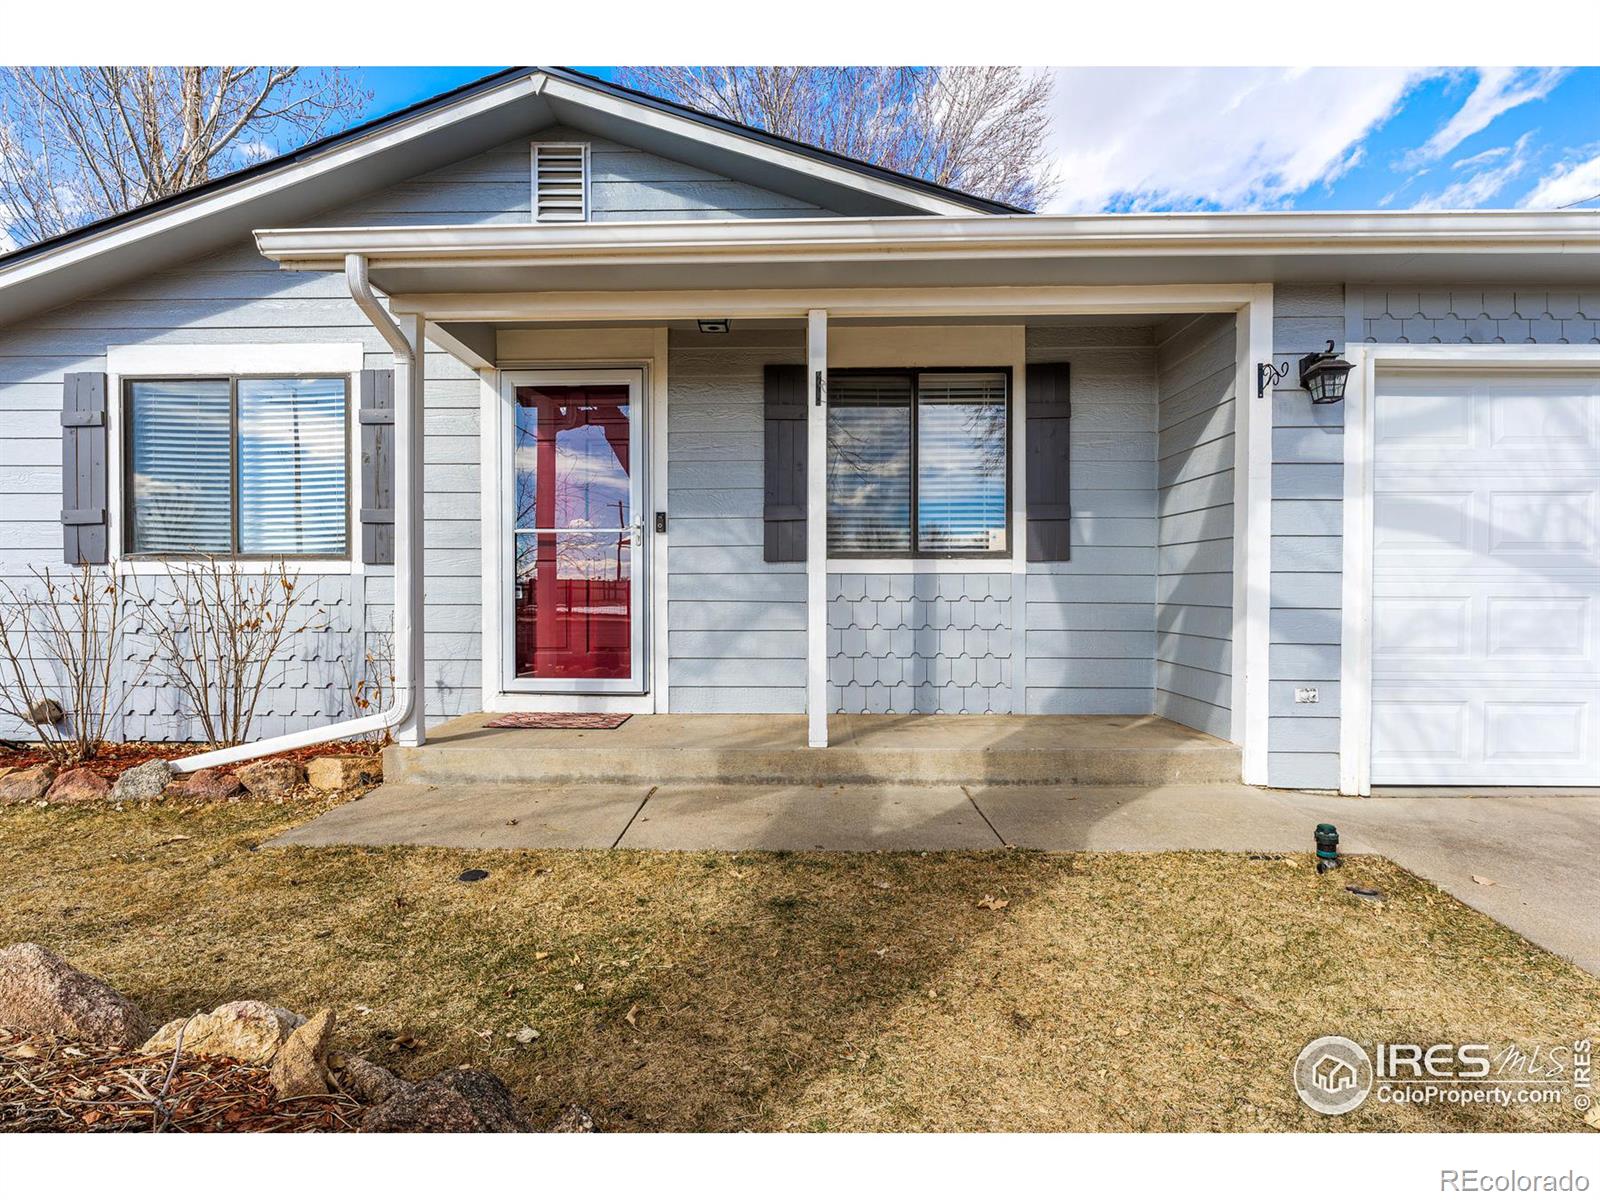 Report Image for 111  3rd Street,Frederick, Colorado